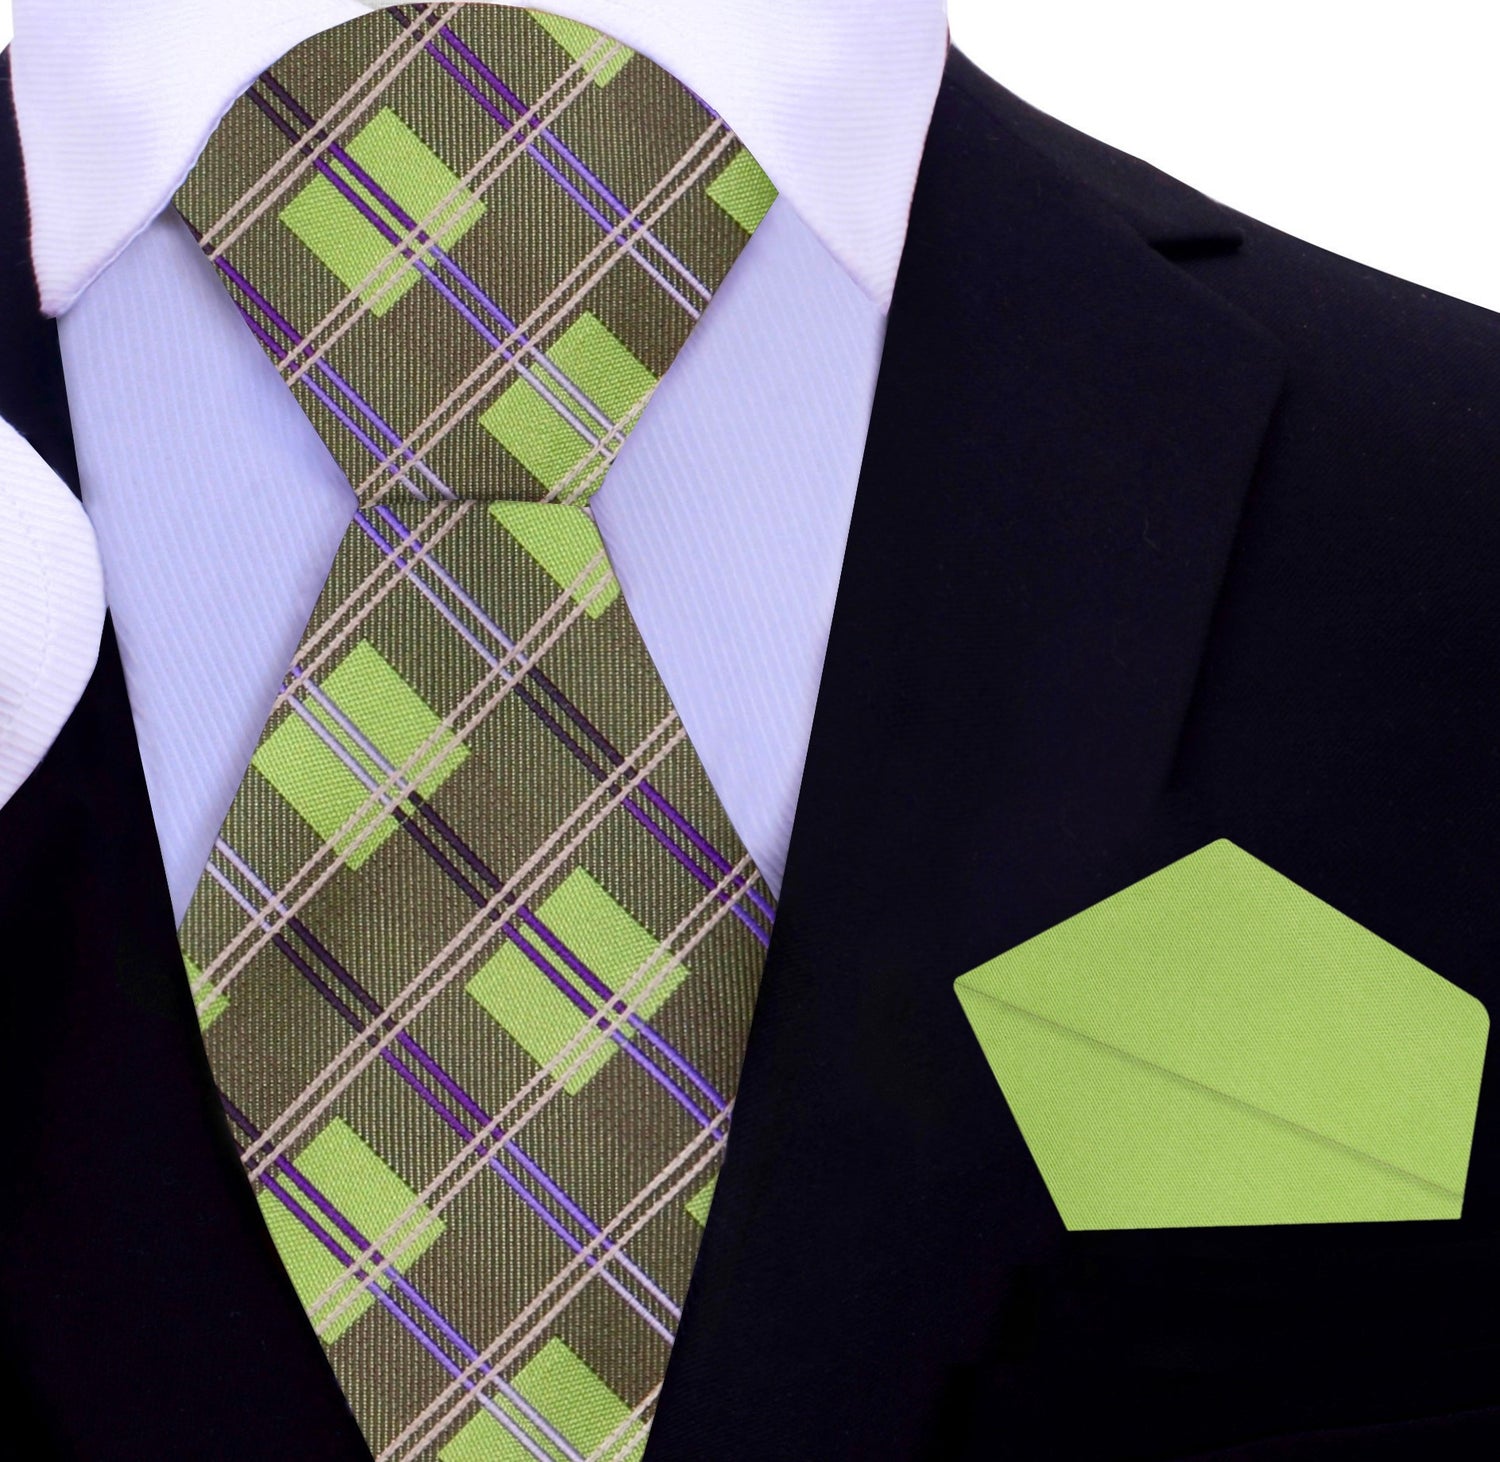 Green Argyle Tie and Light Green Square